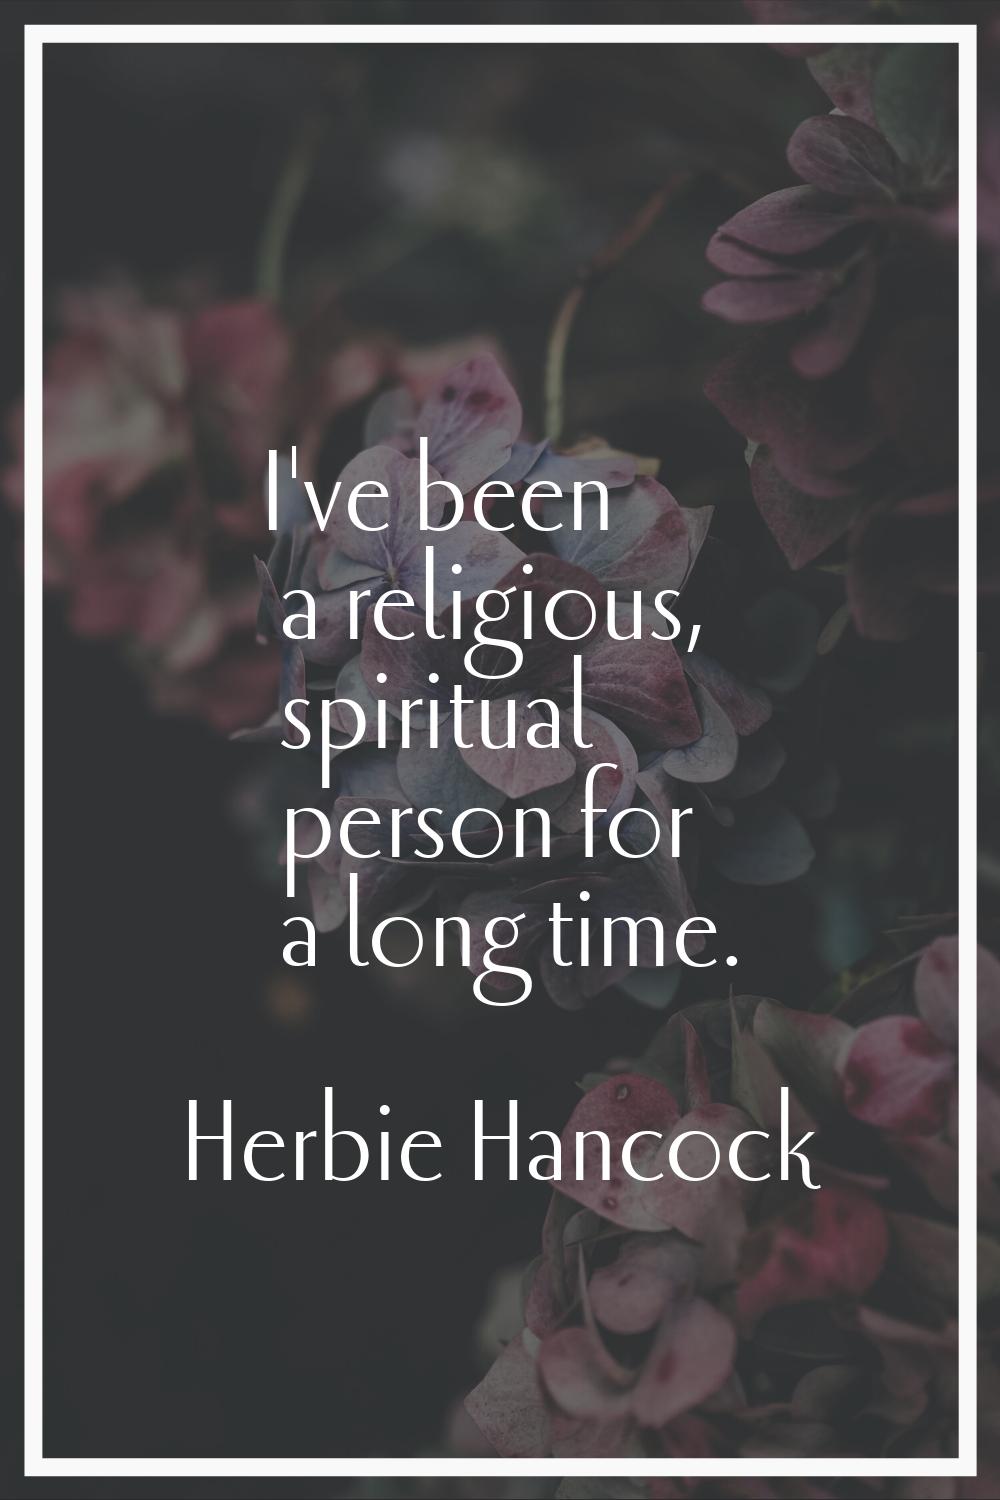 I've been a religious, spiritual person for a long time.